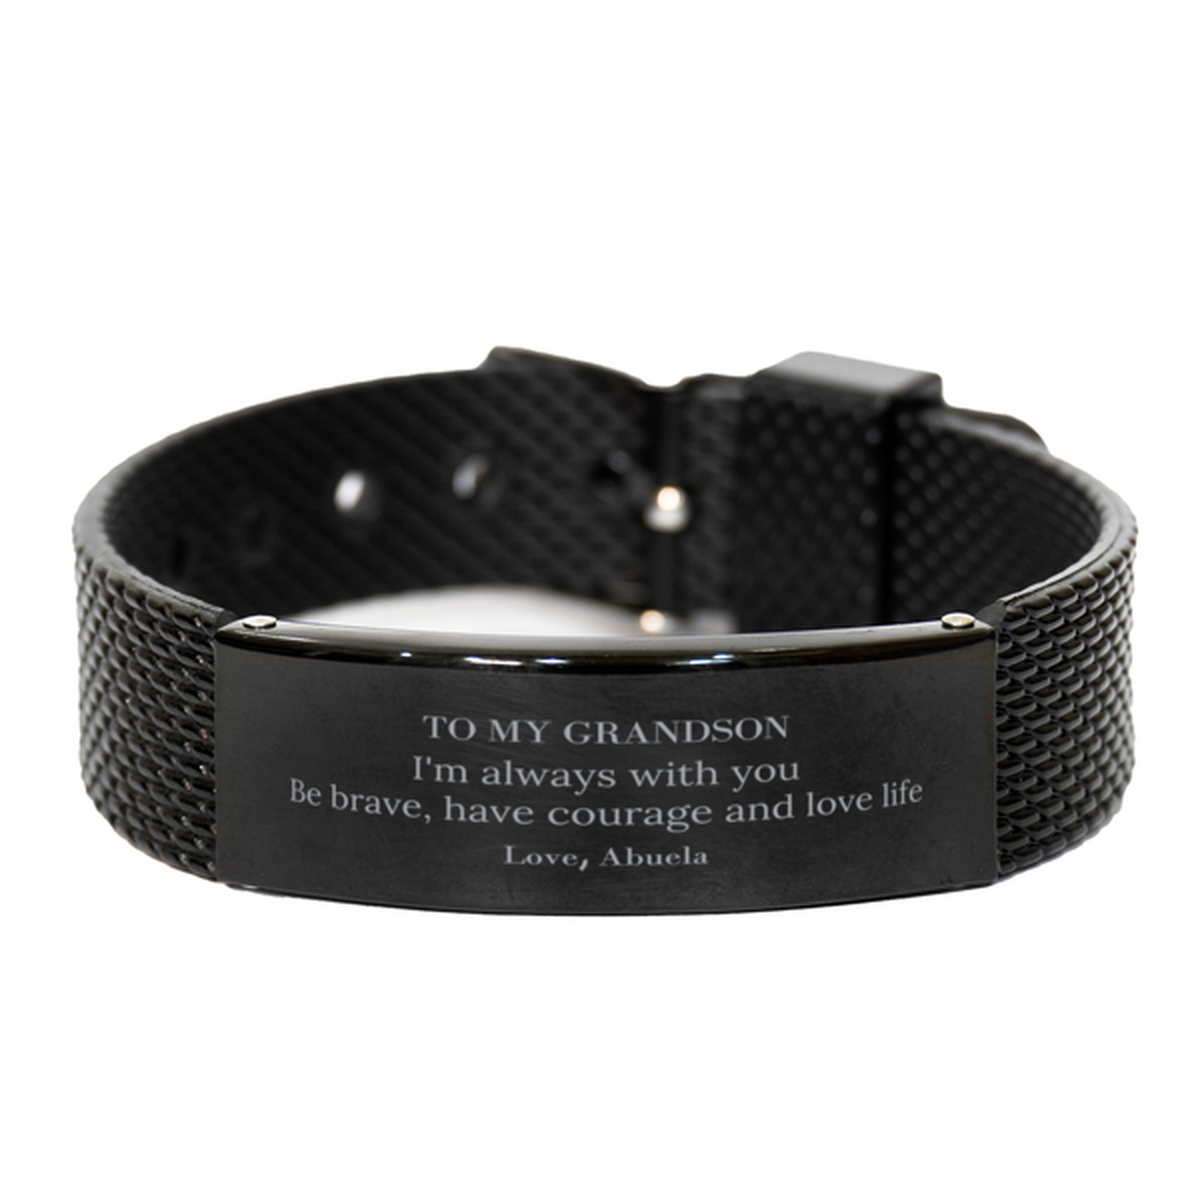 To My Grandson Gifts from Abuela, Unique Black Shark Mesh Bracelet Inspirational Christmas Birthday Graduation Gifts for Grandson I'm always with you. Be brave, have courage and love life. Love, Abuela